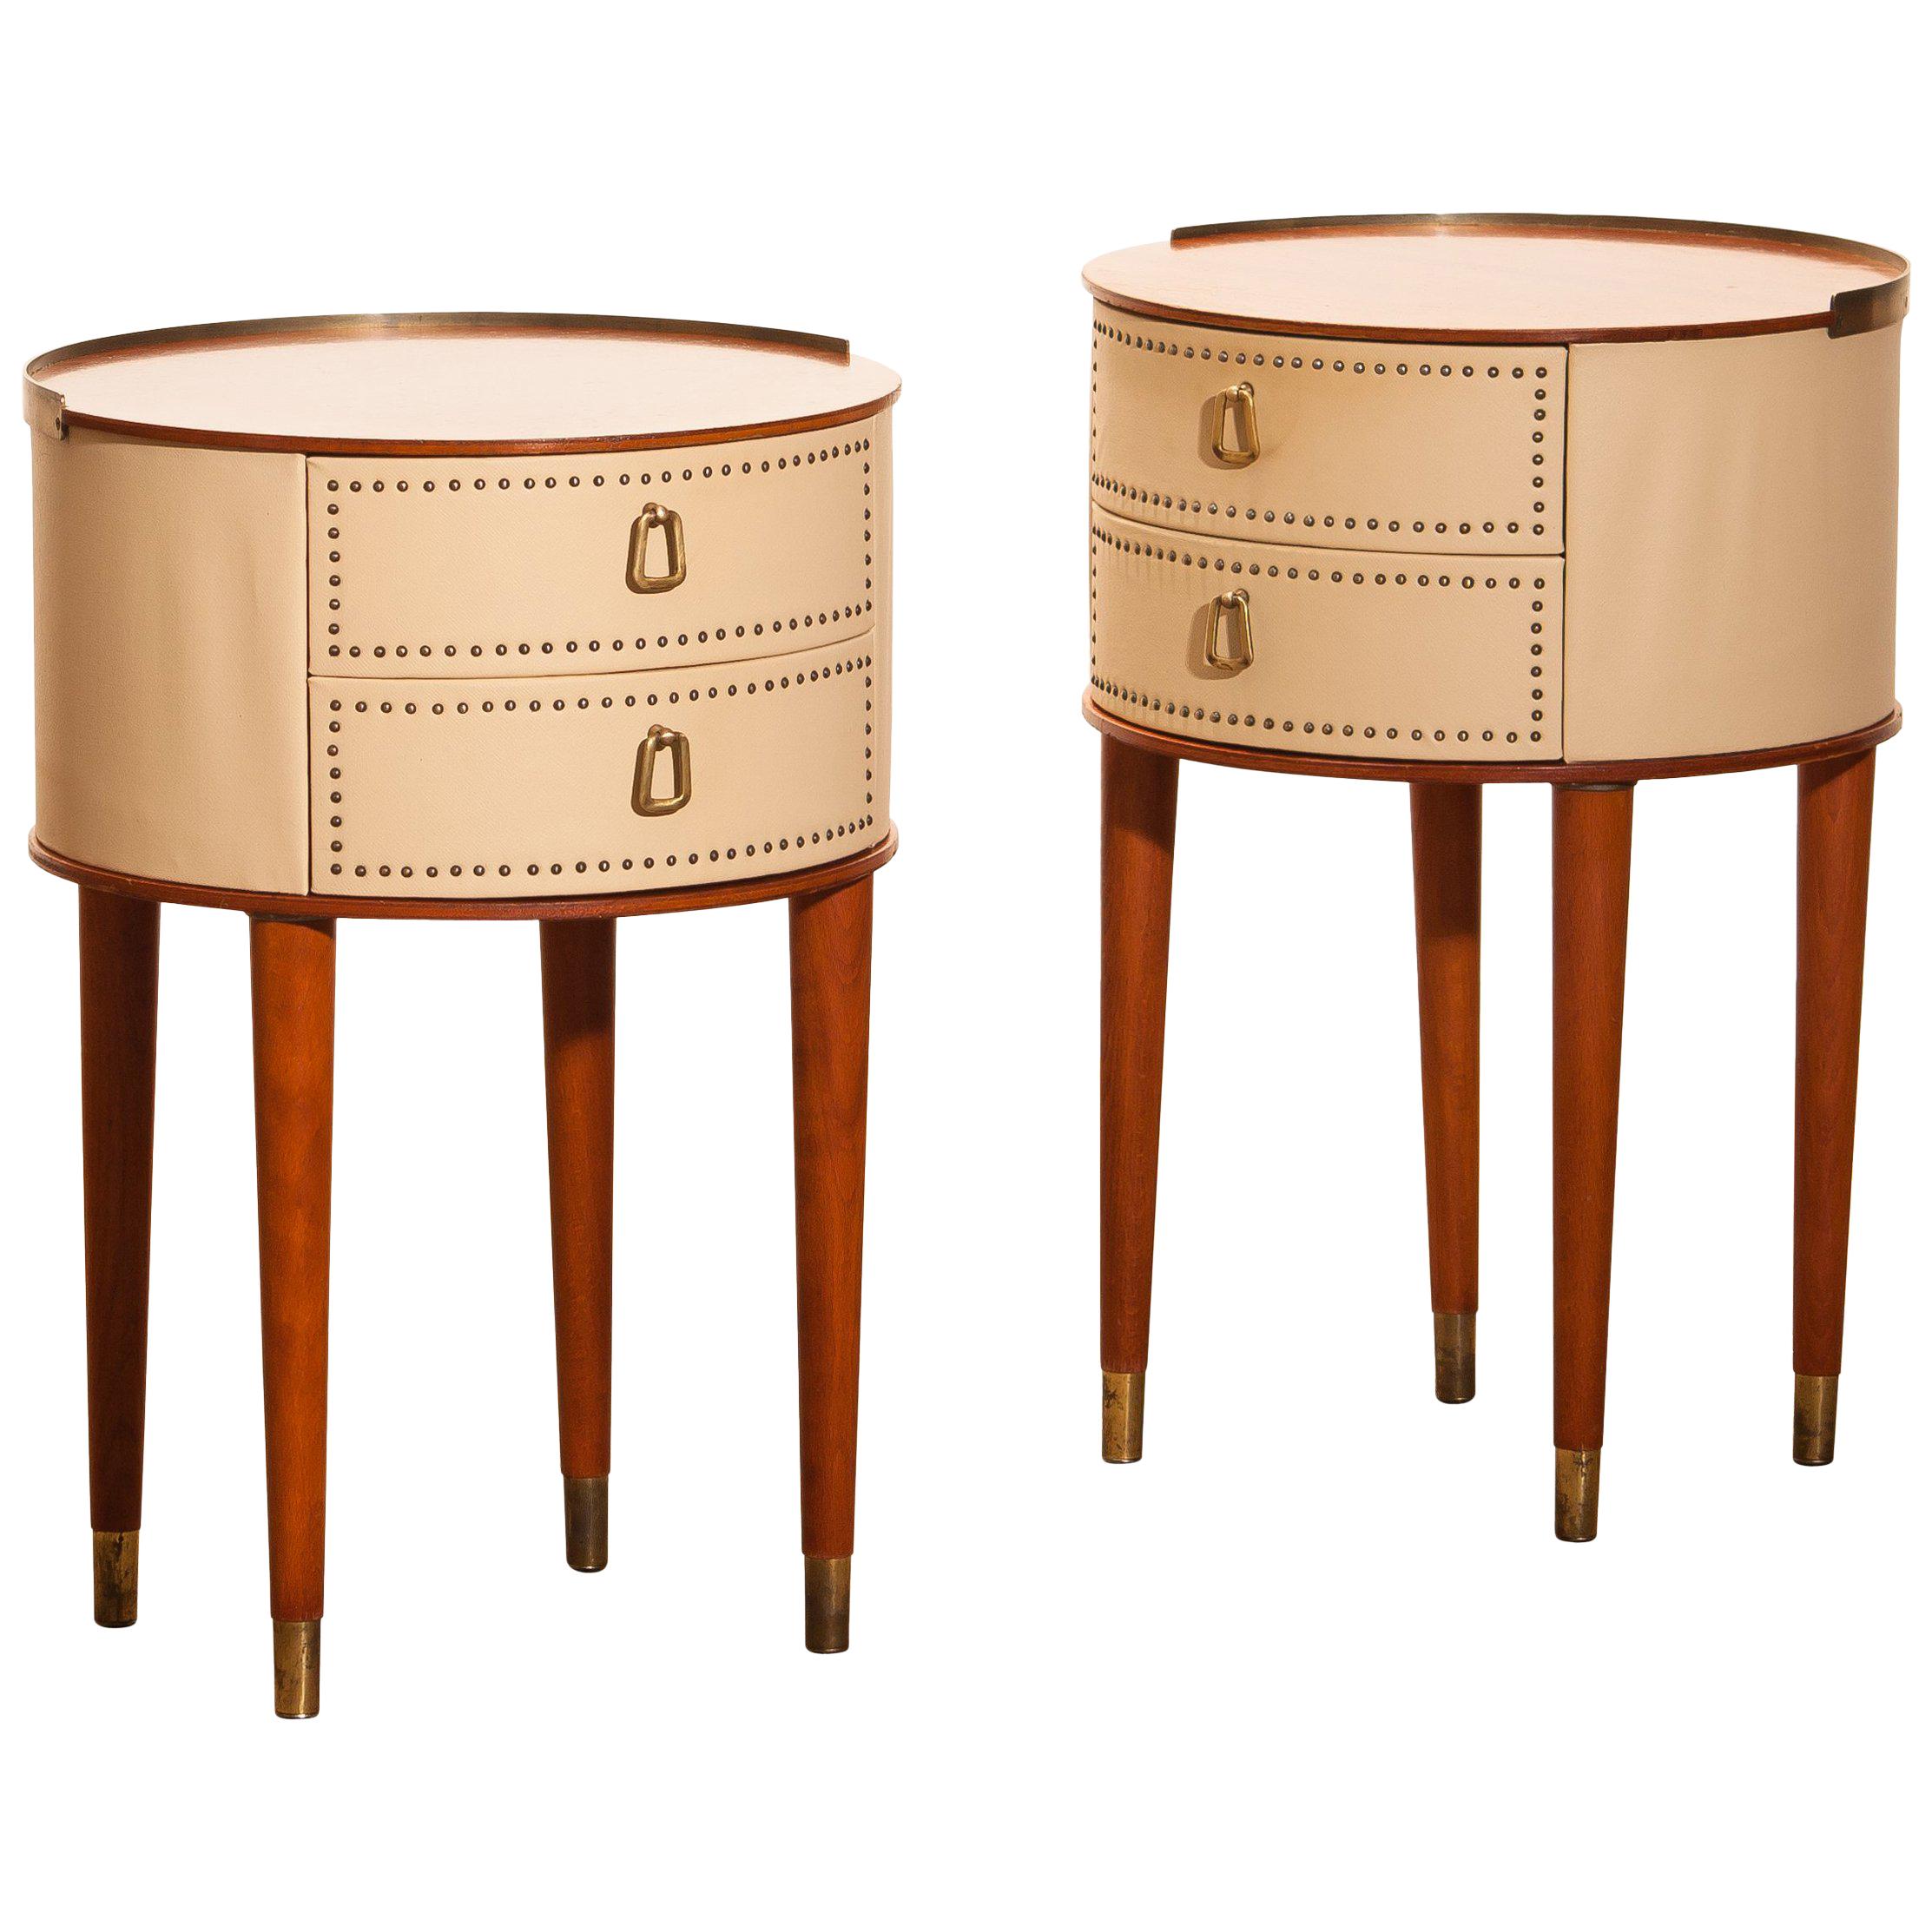 1950s, mahogany / brass and vinyl, bedside tables or nightstands, on high legs designed by Halvdan Pettersson in the 1950s for Tibro Möbelfabrik Sweden. This set nightstands is in good condition.

Period: 1950s.
Measures: The bedside tables are ø